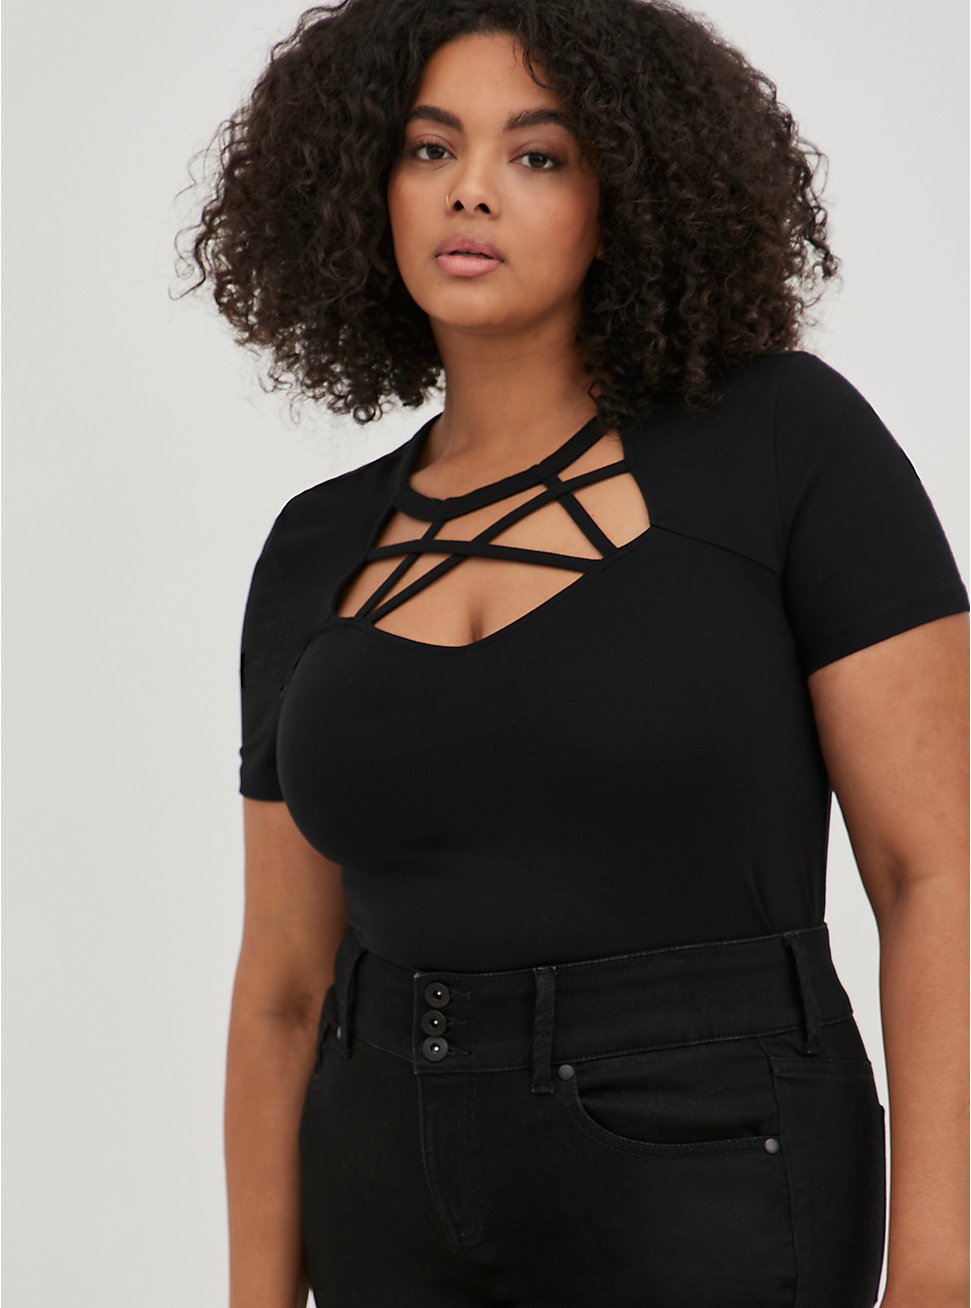 Plus Size Foxy Sweetheart Neckline Strappy Cutout Short Sleeve Top, BLACK, hi-res